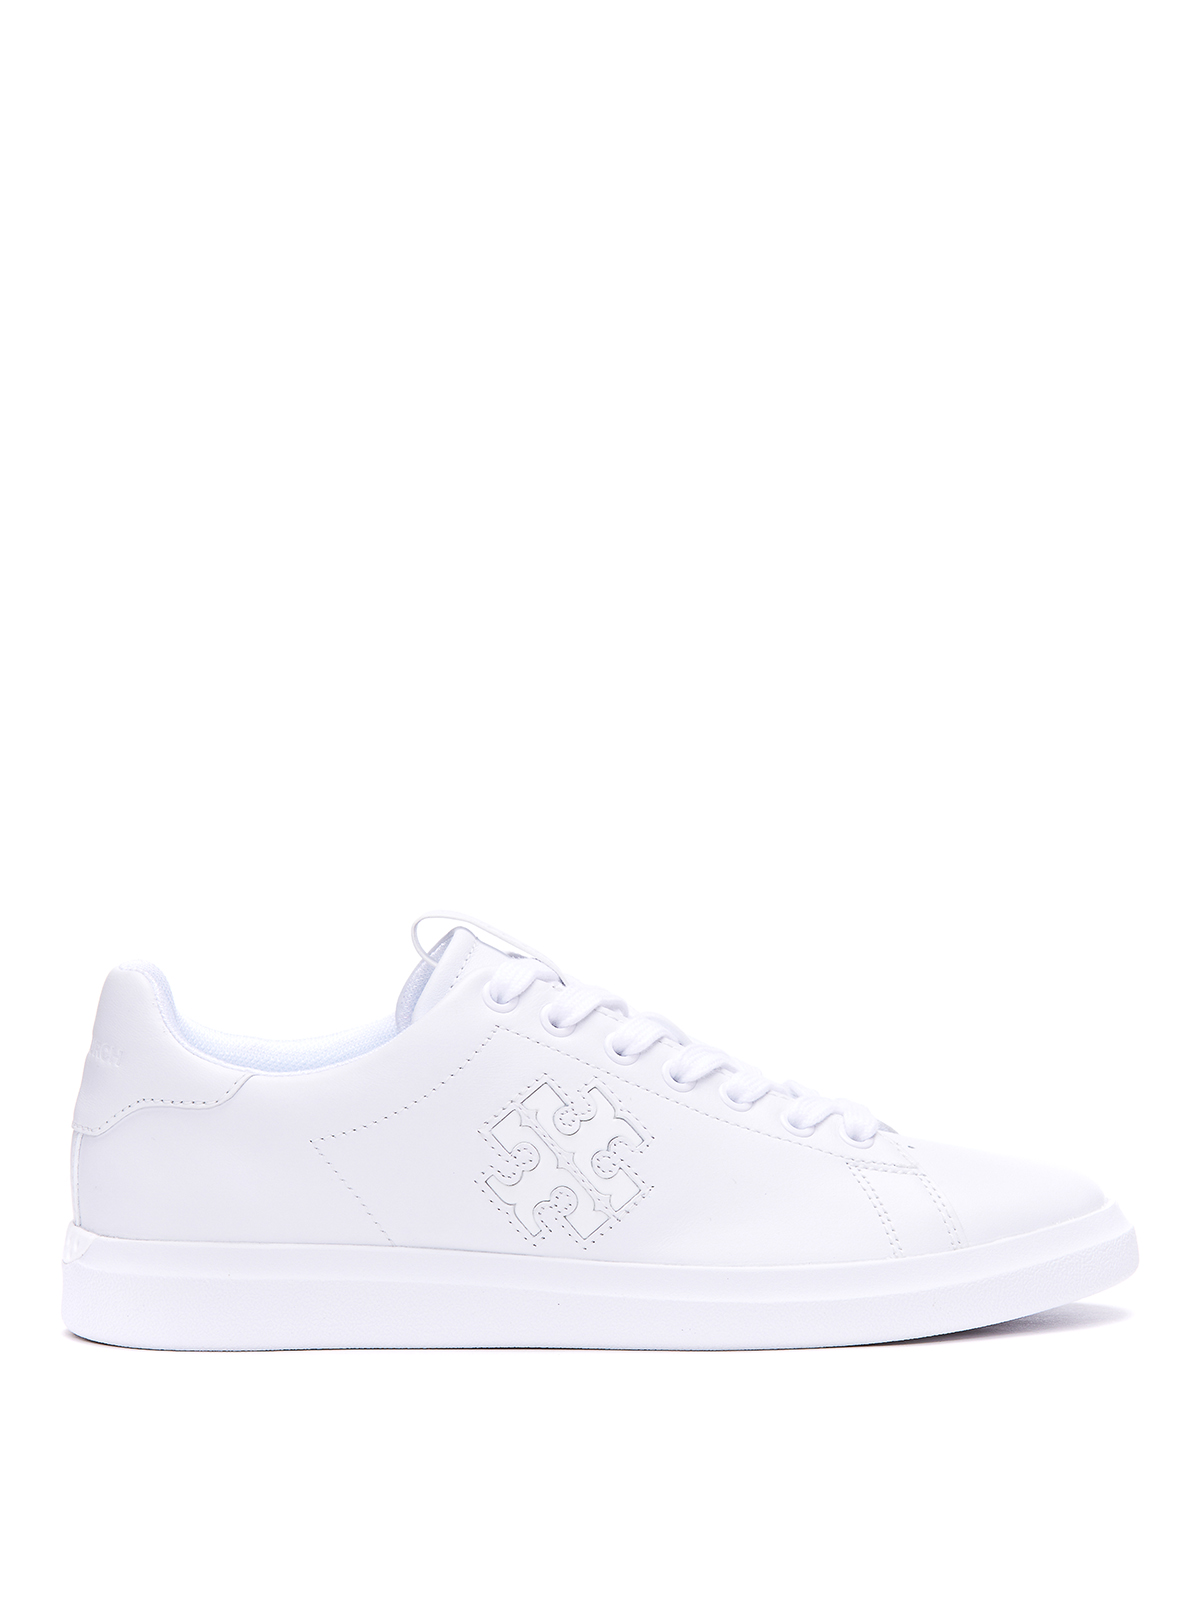 Tory Burch Logo Howell Sneakers In White